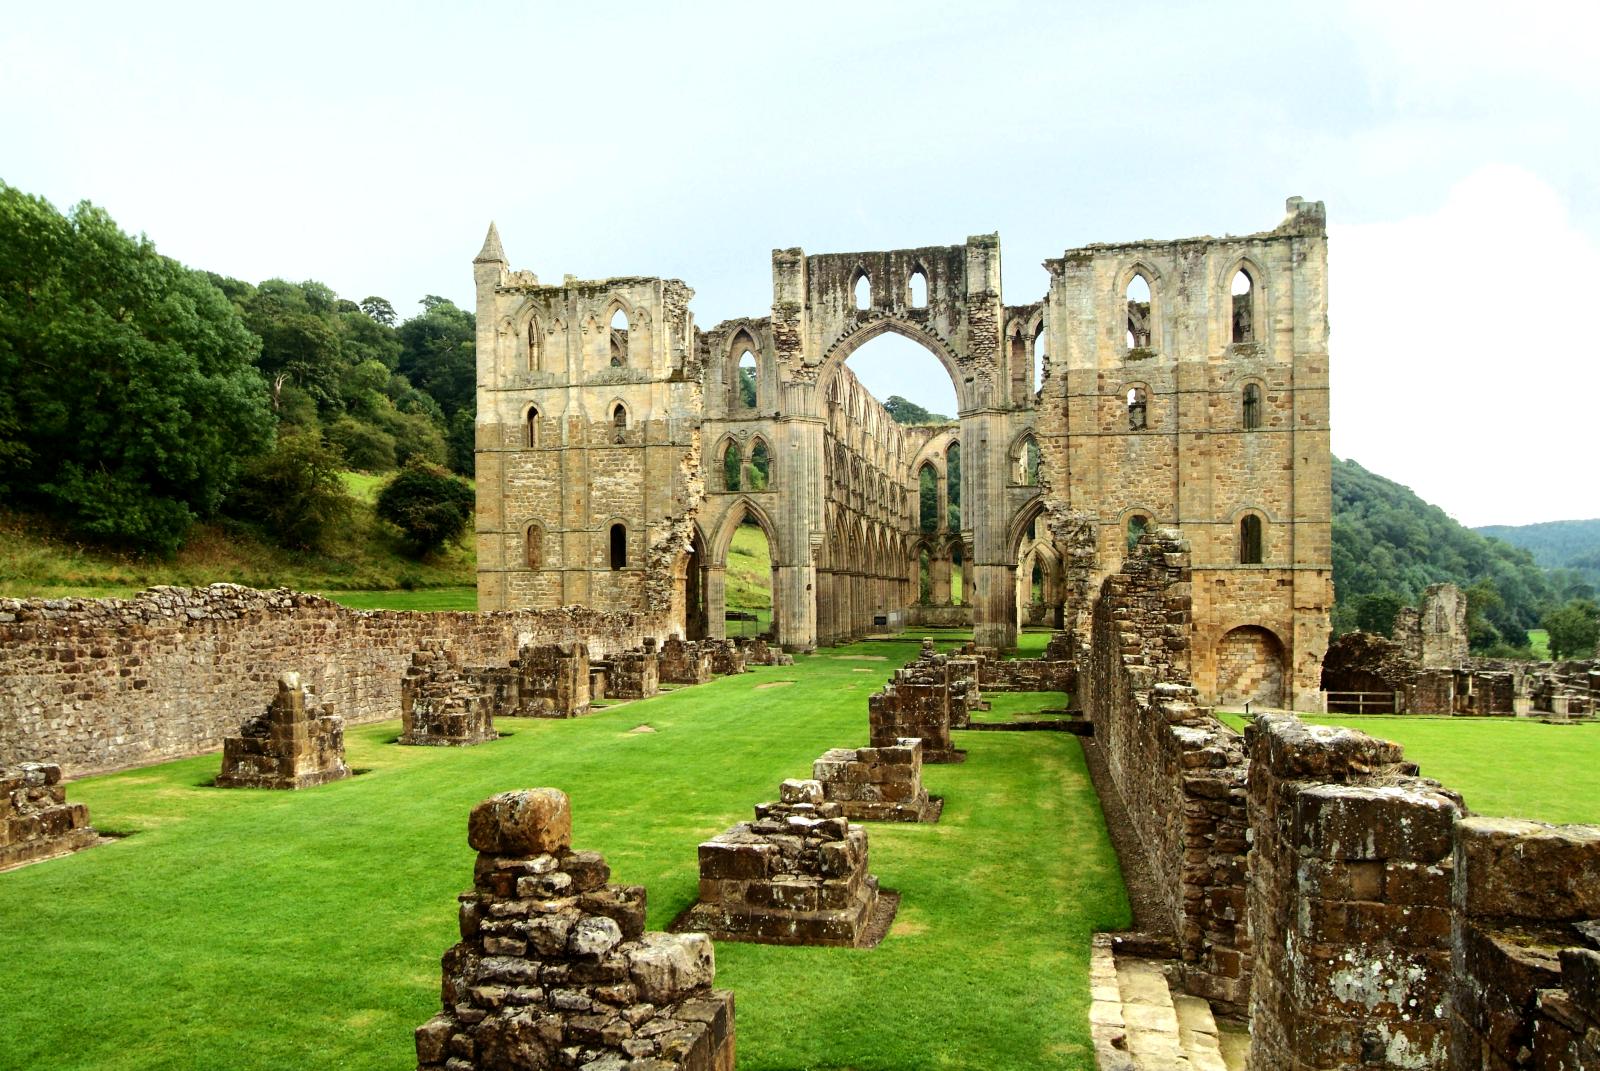 Rievaulx Abbey. Religious institutions provided much of the care for disabled people in the medieval period. 